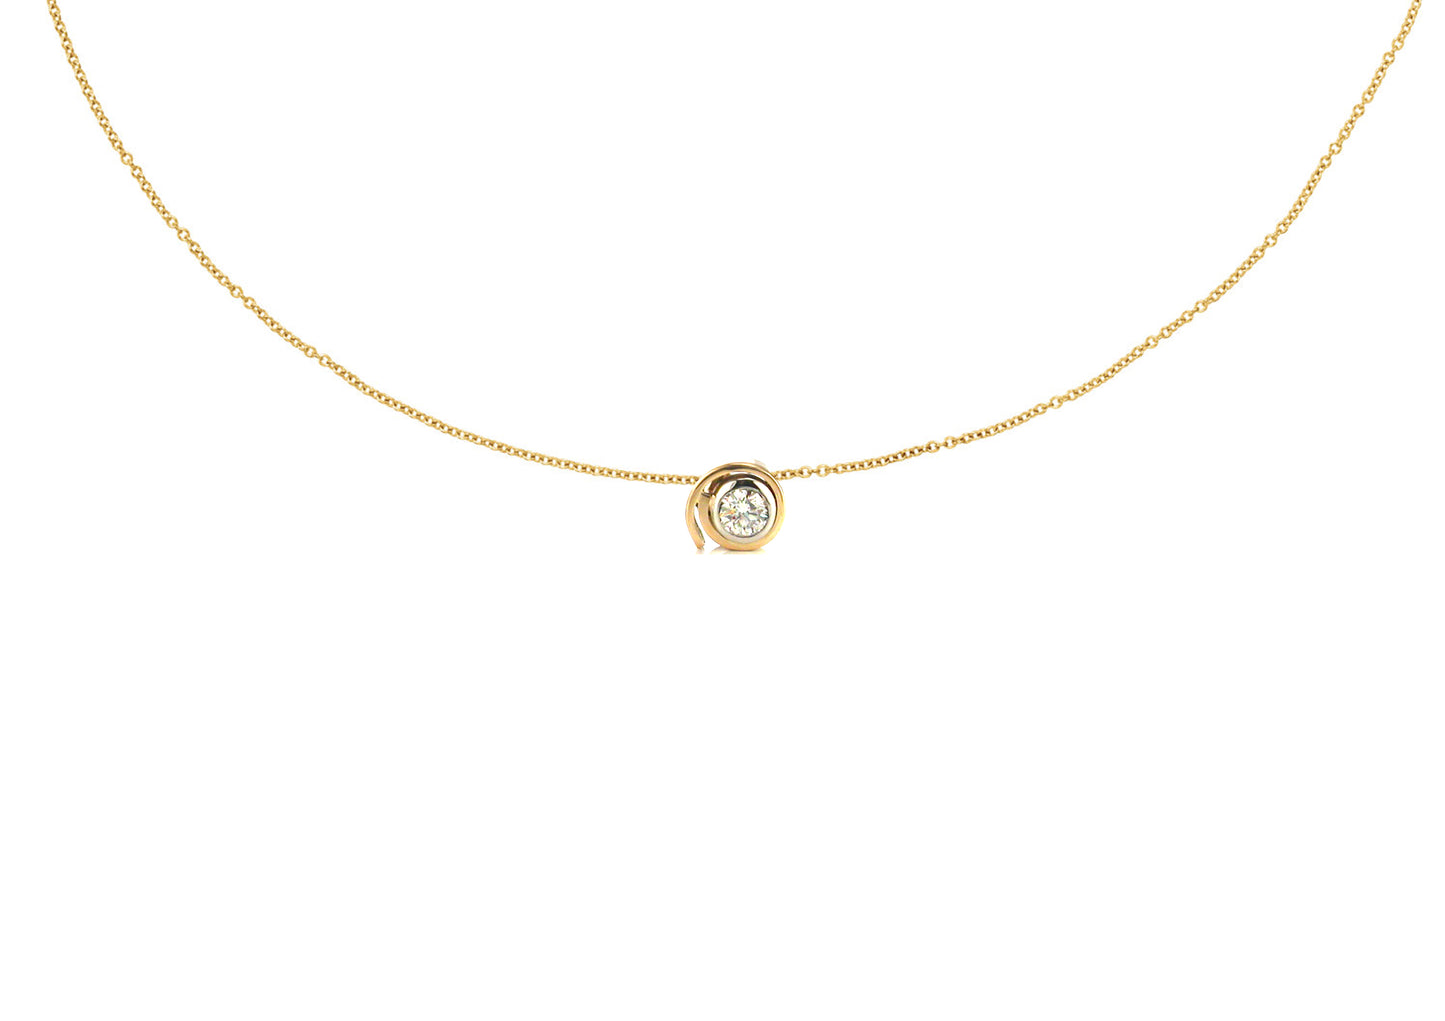 Wrapped two tone diamond ~ Unique two tone wrapped style diamond pendant necklace.  Bezel set diamond with a soft wrap of gold, offering a little unique style to simplicity.